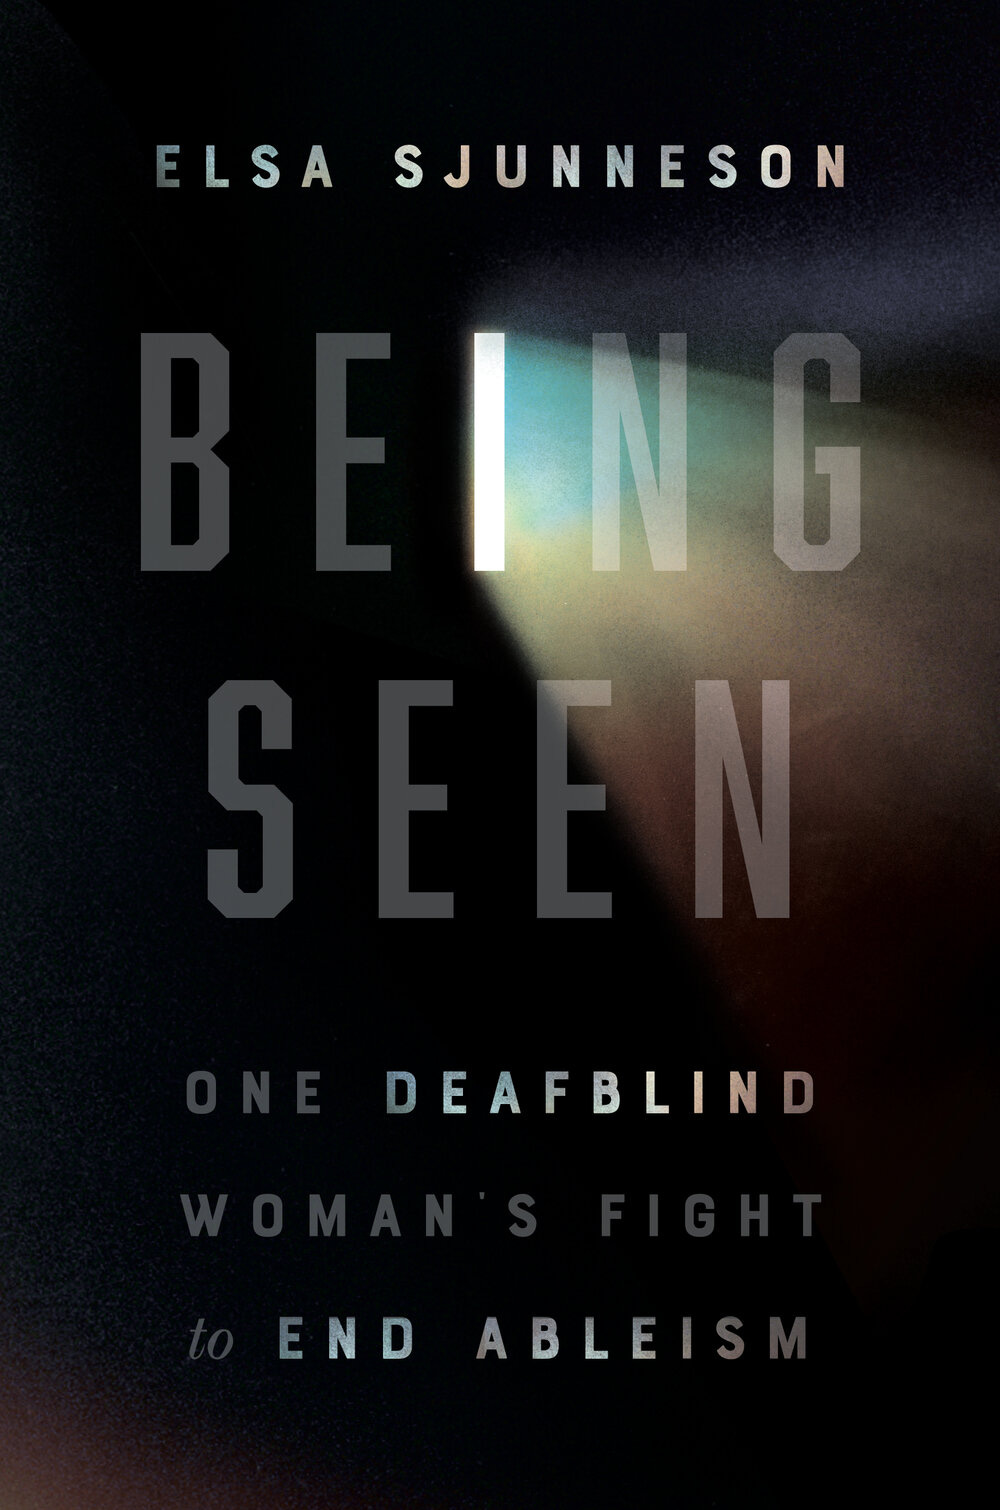 Cover image of Being Seen: One Deafblind Woman’s Fight to End Ableism by Elsa Sjunneson. From the letter “I” in “BEING,” the color of Elsa’s cataract refracts in a rainbow-colored prismatic effect over a dark background. “Deafblind” is emphasized with light.